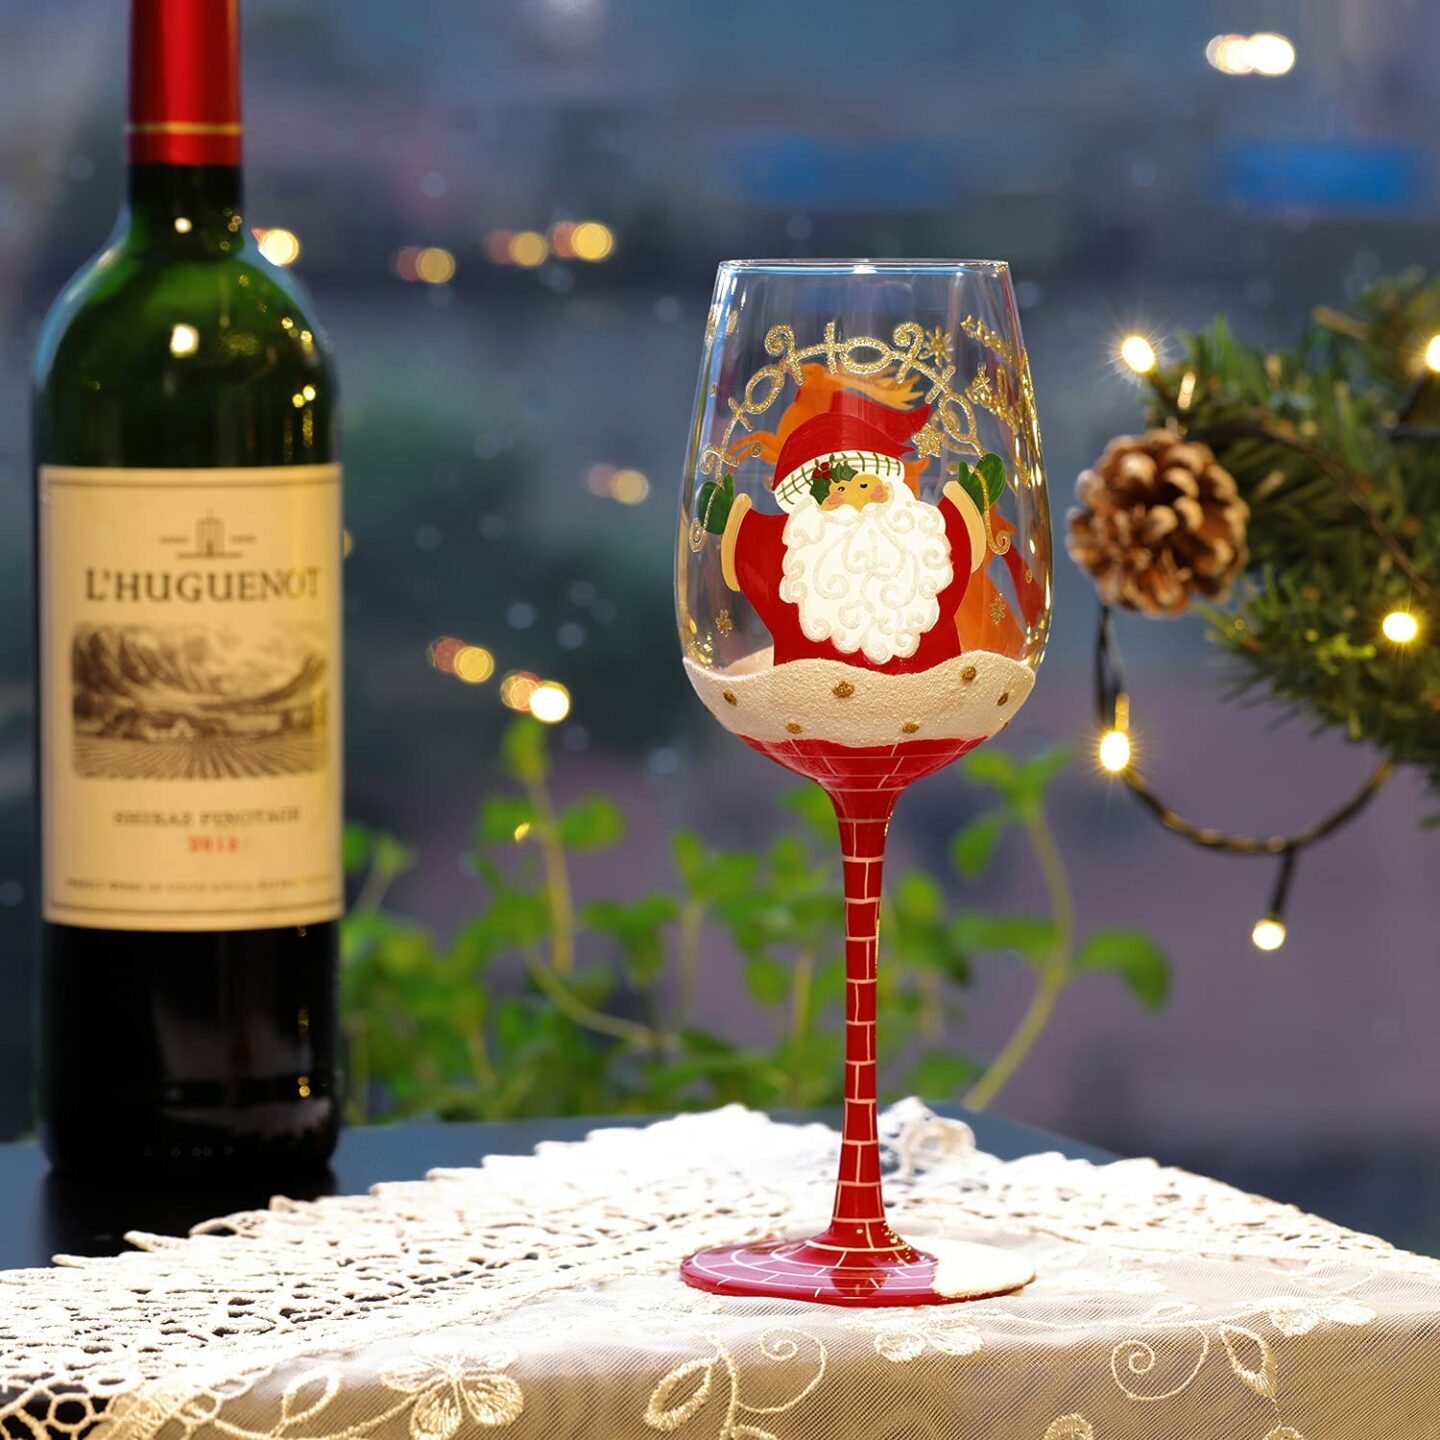 Painted wine glass of Santa coming down the chimney, pictured in front of a bottle of wine and a Christmas tree